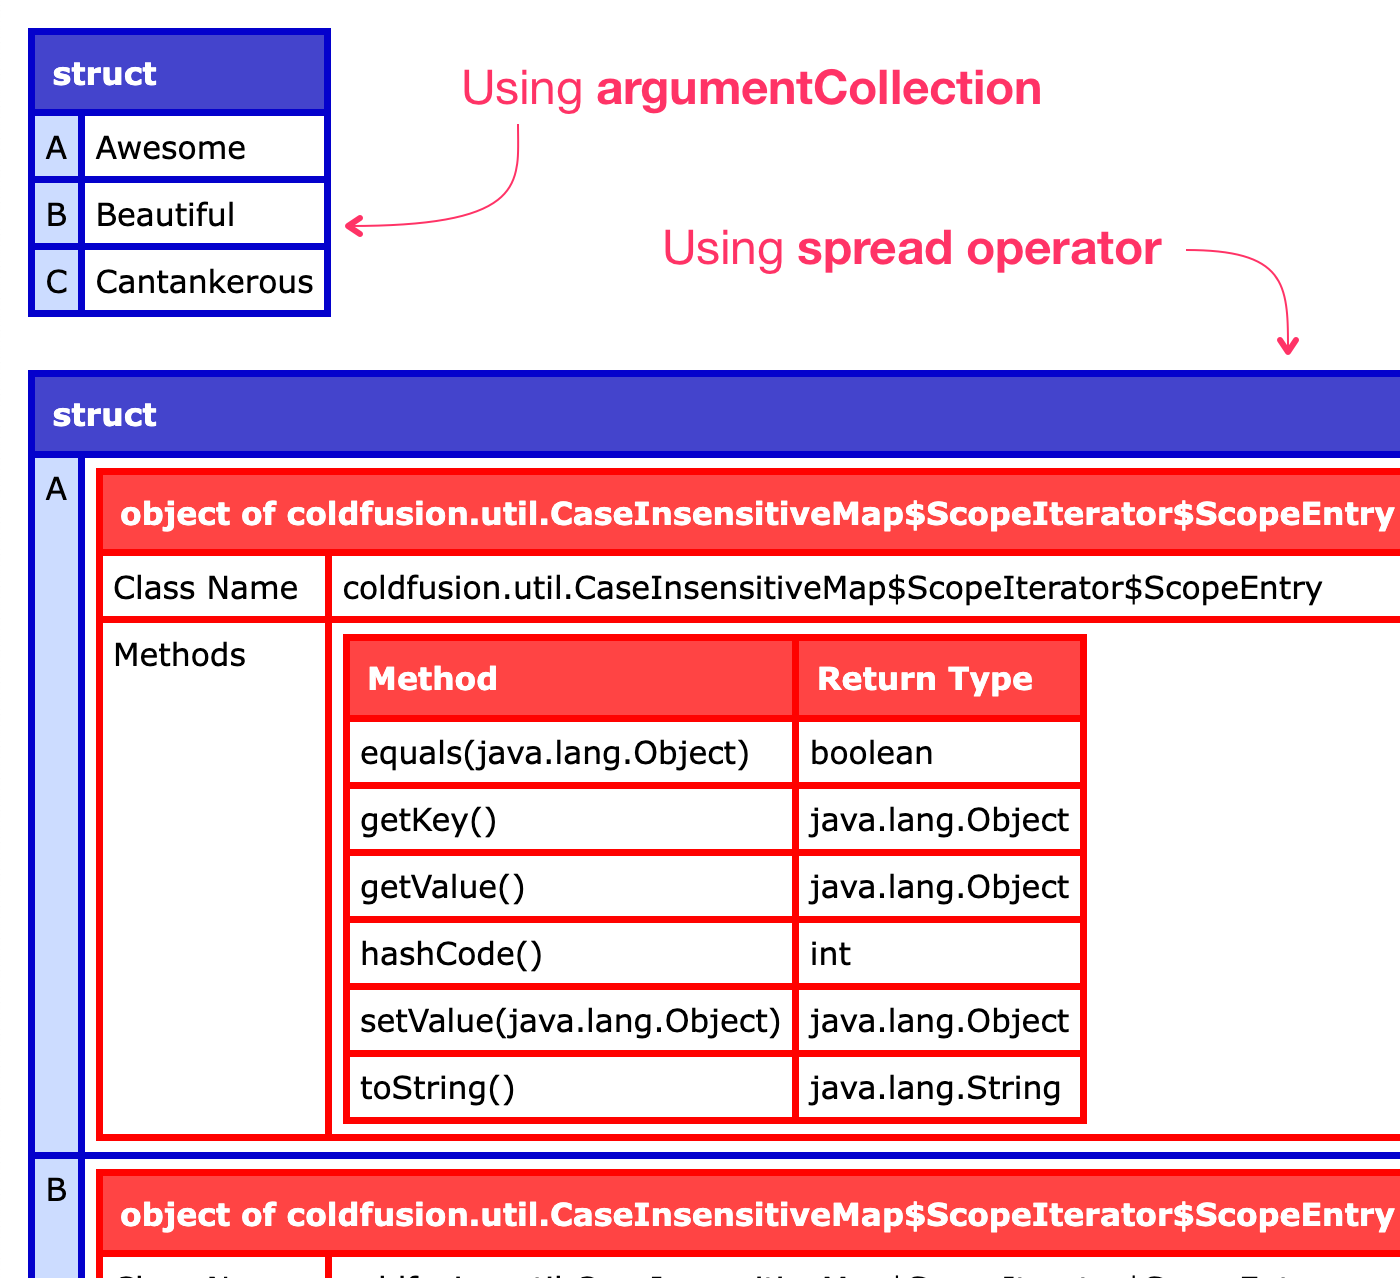 Arguments scope dumped to screen with unexpected output in ColdFusion.